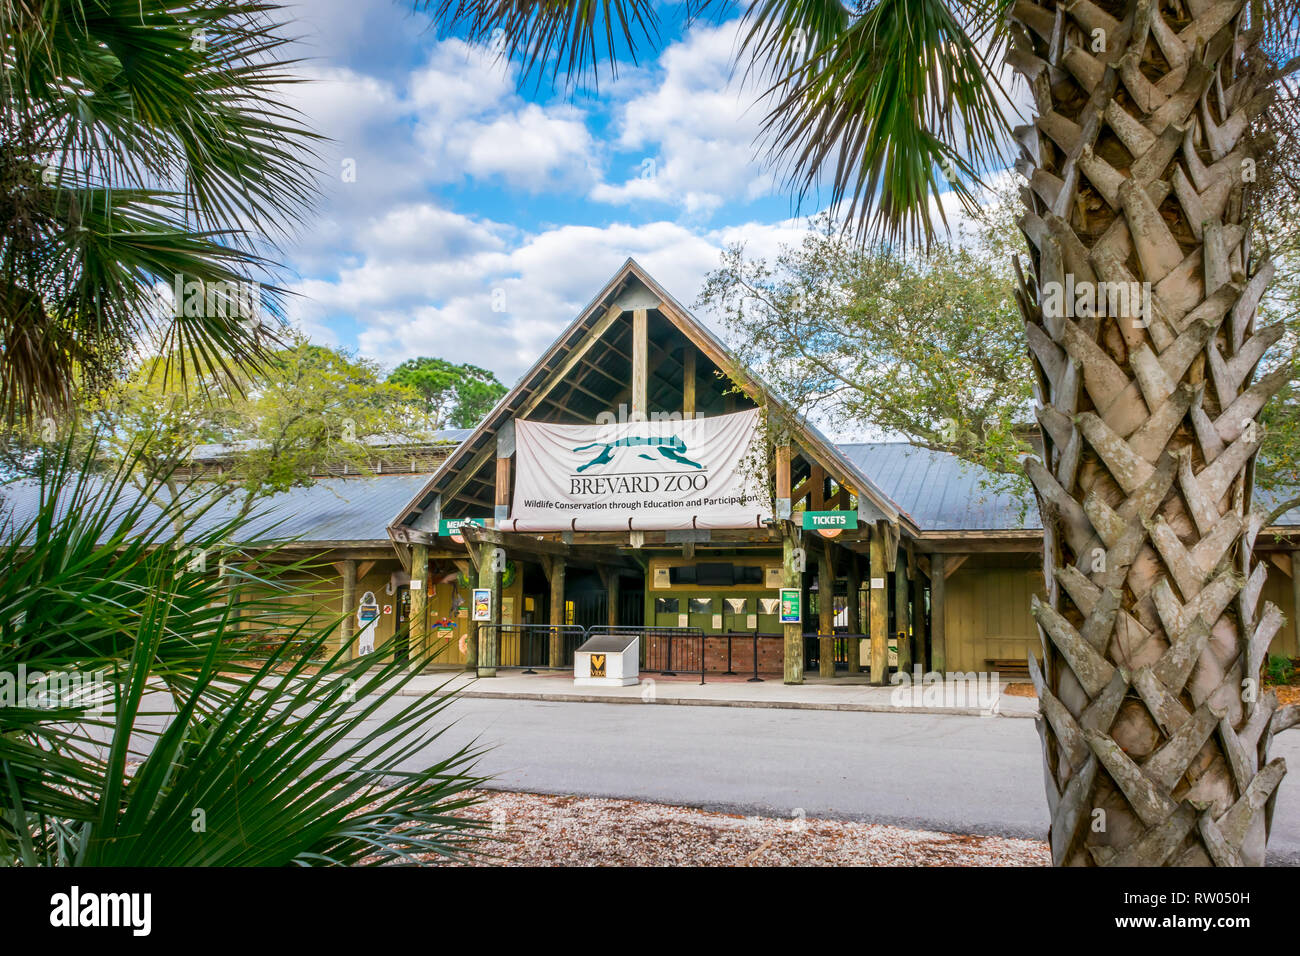 MELBOURNE FLORIDA, FEB 23 2019: Brevard Zoo is a 75 acre facility located in Melbourne, Florida. The zoo is home to more than 900 animals. Stock Photo